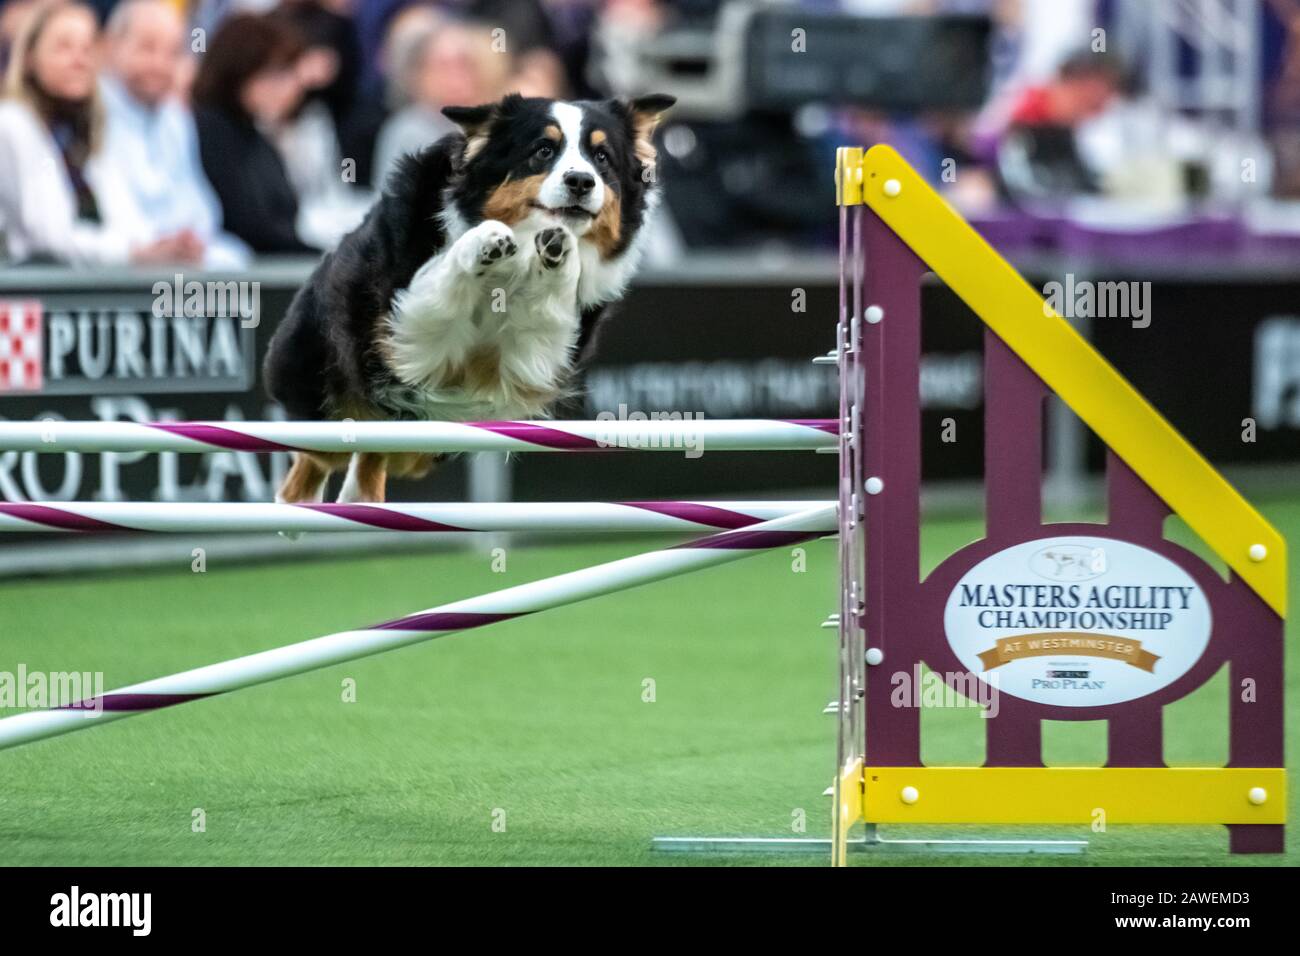 New York, USA. 8th Feb, 2020. Lili Ann, an Australian Shepherd, clears an obstacle during the qualifying round of The Westminster Kennel Club Dog show Masters Agility Championship in New York city. Credit: Enrique Shore/Alamy Live News Stock Photo